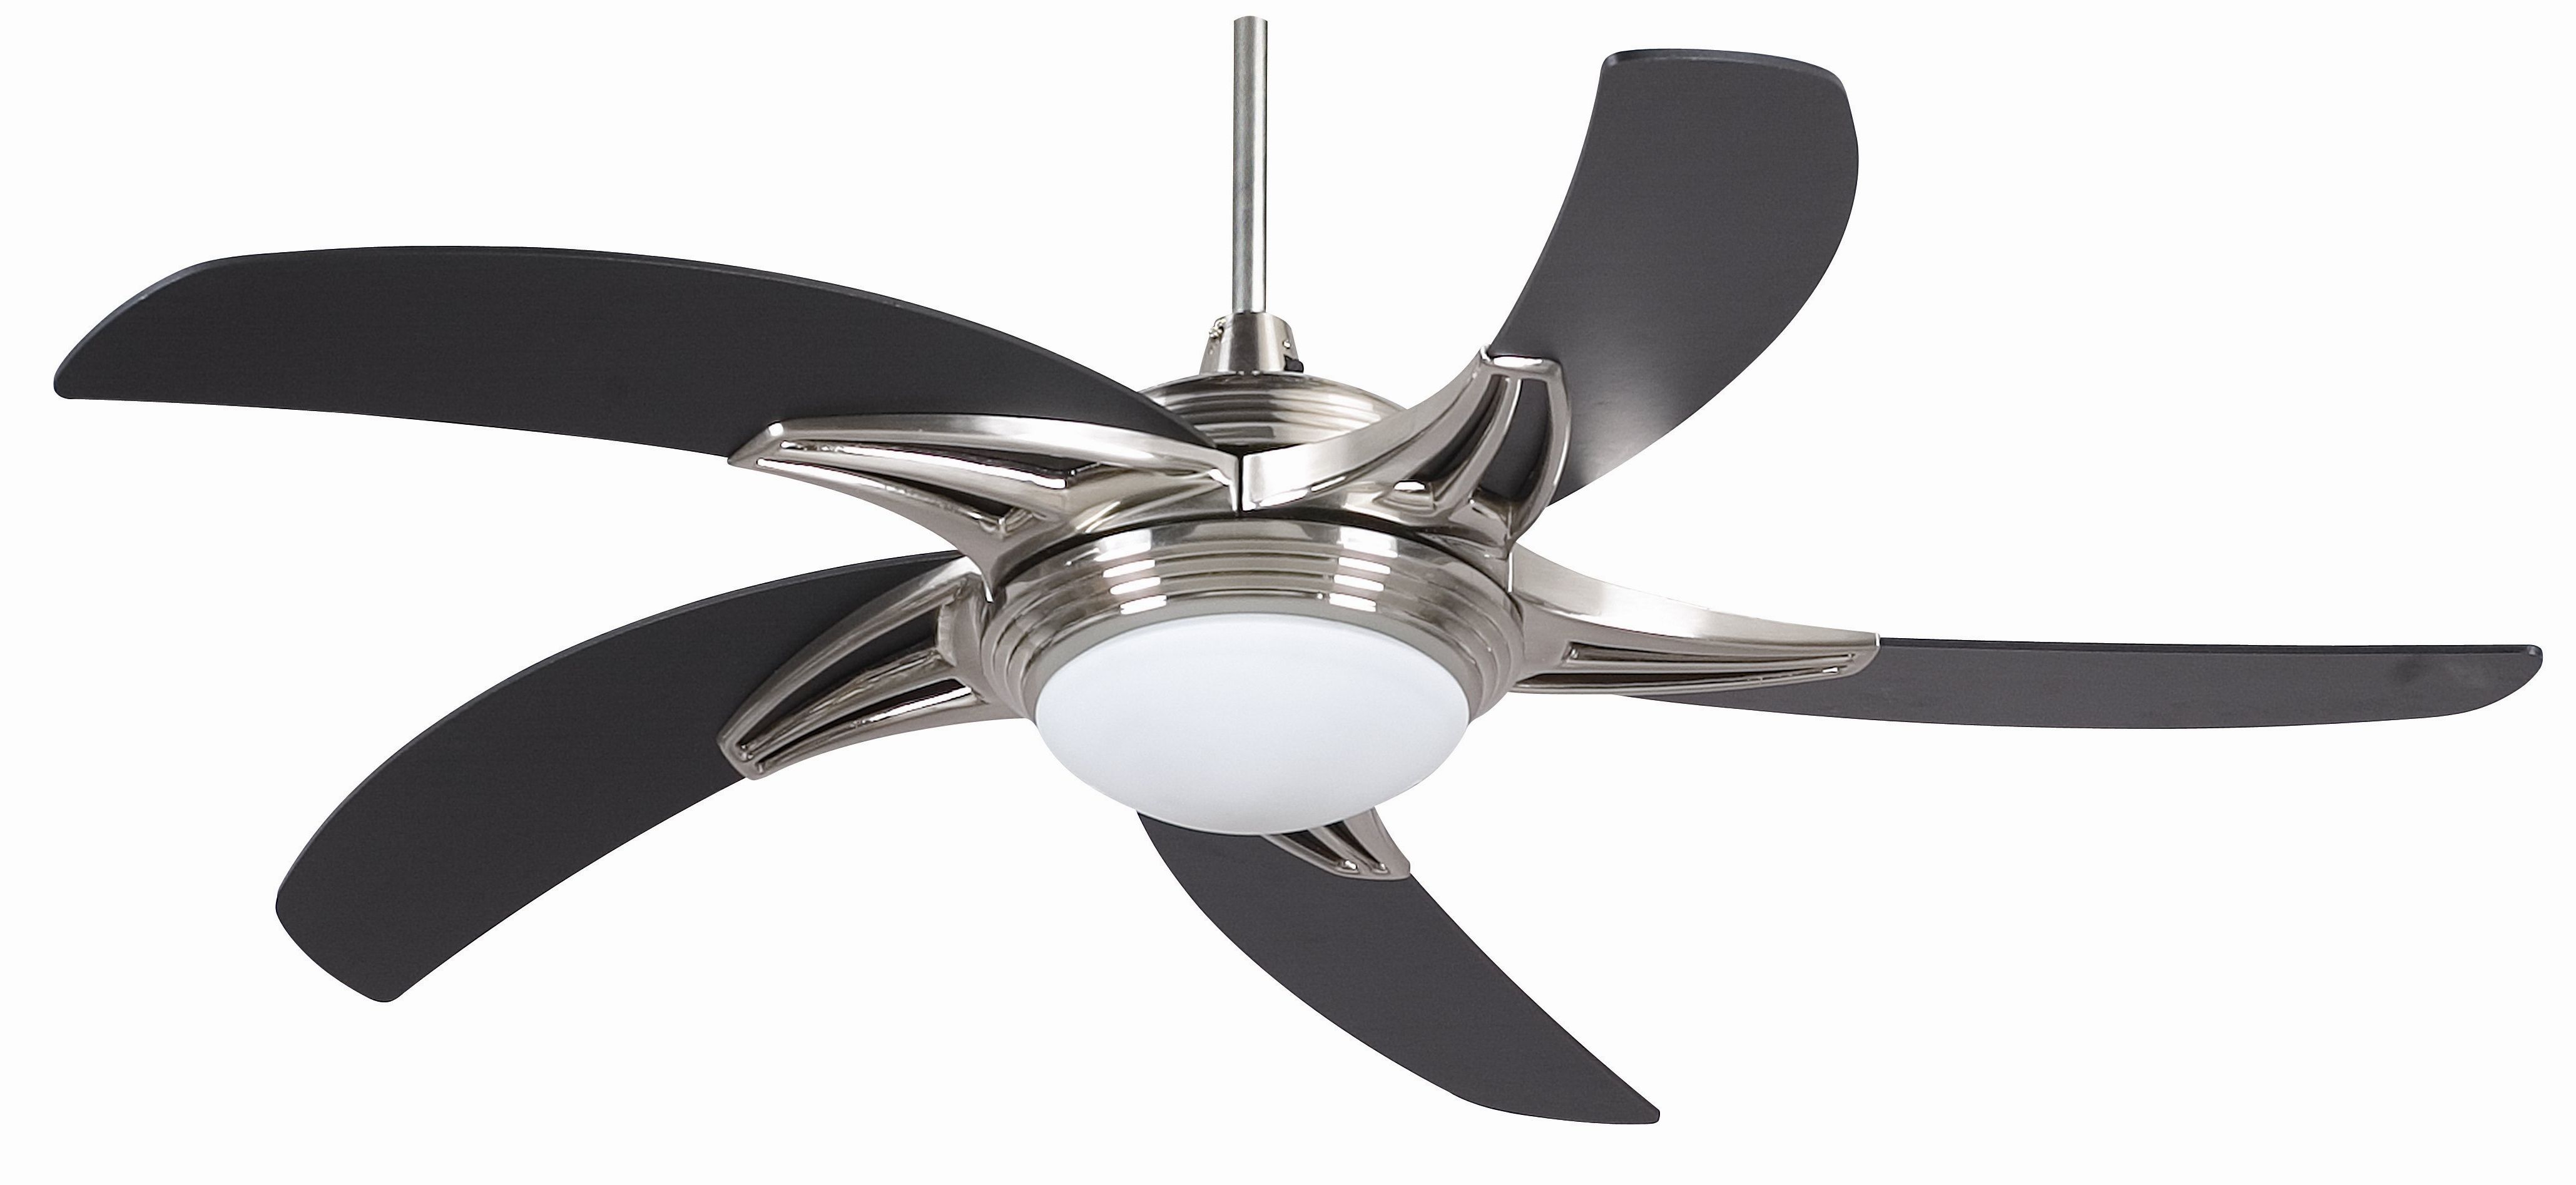 Mccarthy 5 Blade Ceiling Fans Throughout Widely Used Ebern Designs 52" Beachmont 5 Blade Ceiling Fan (View 18 of 20)